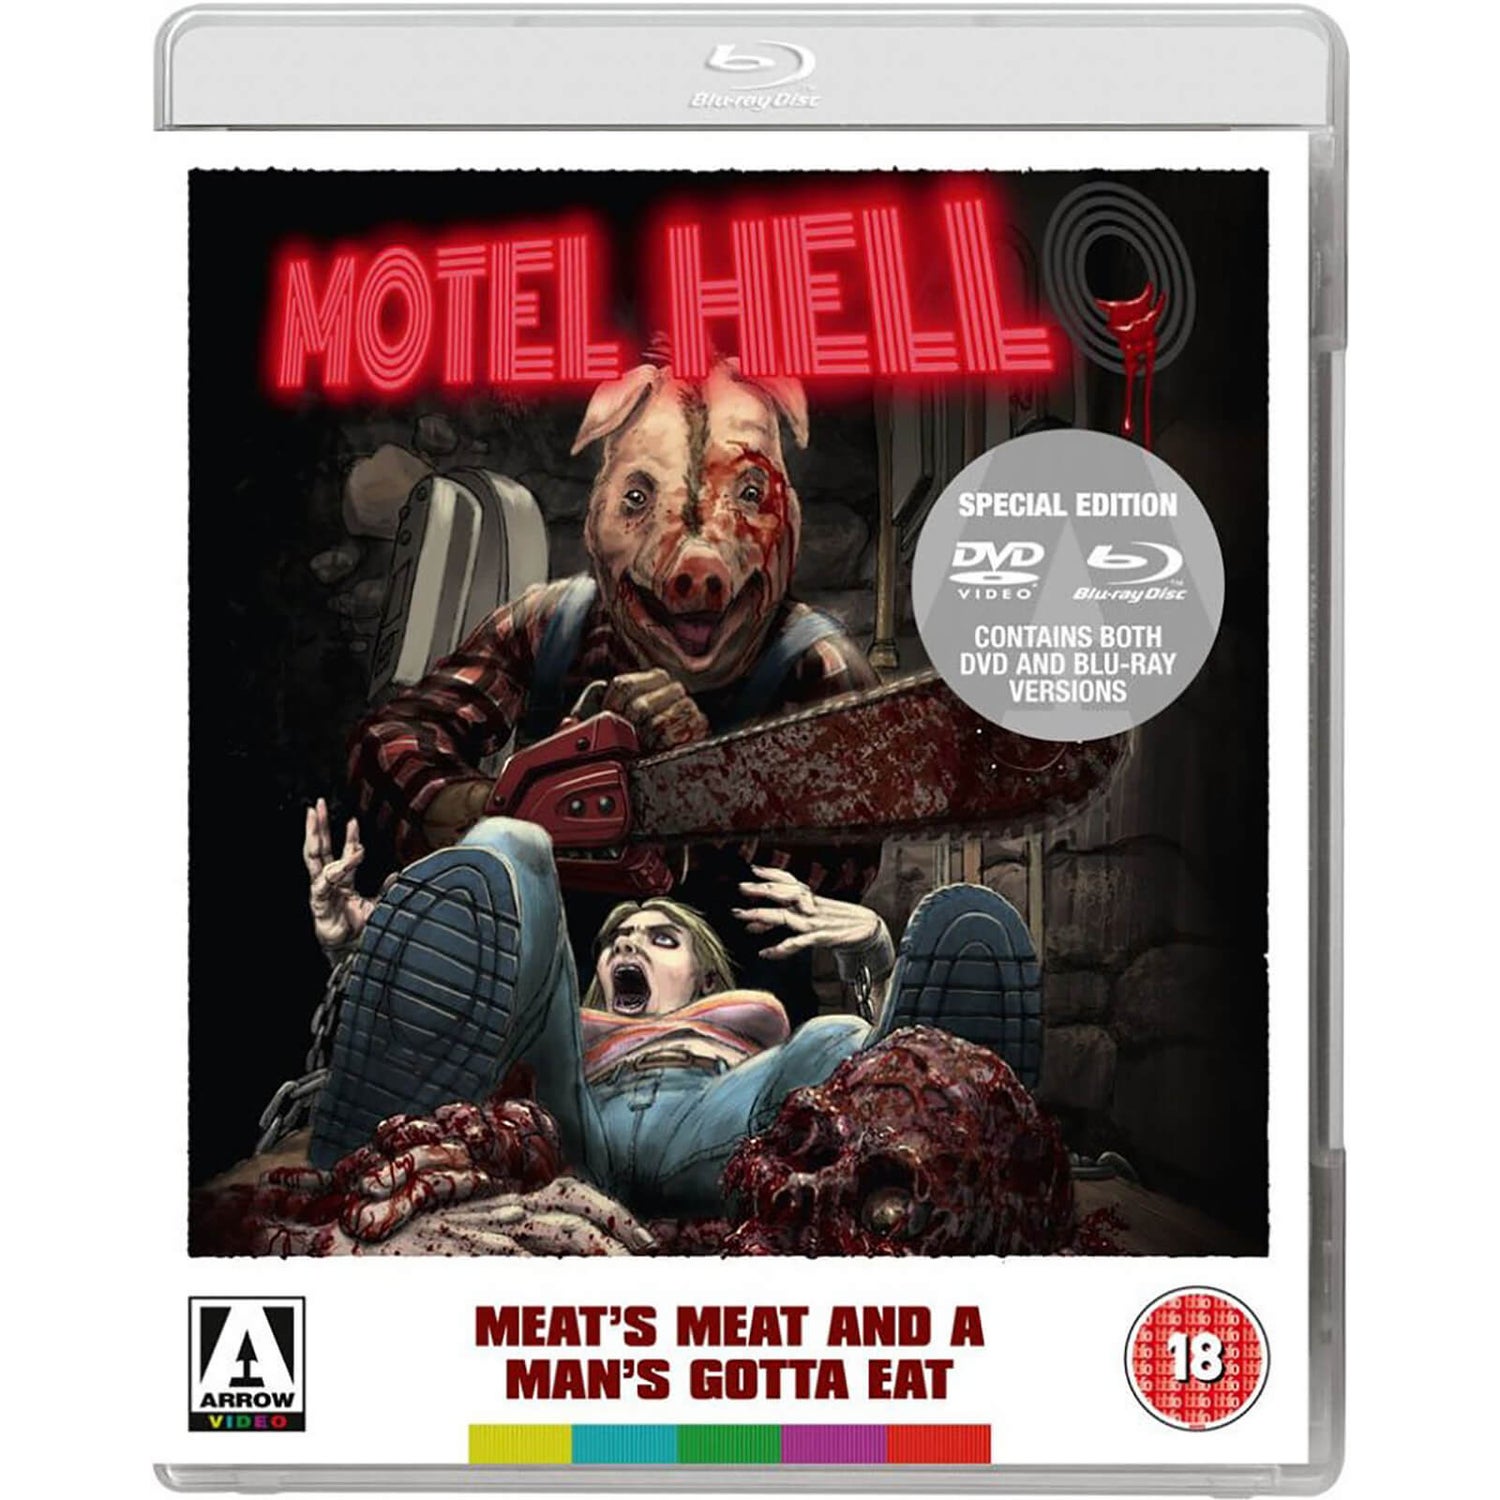 Motel Hell (Includes DVD)